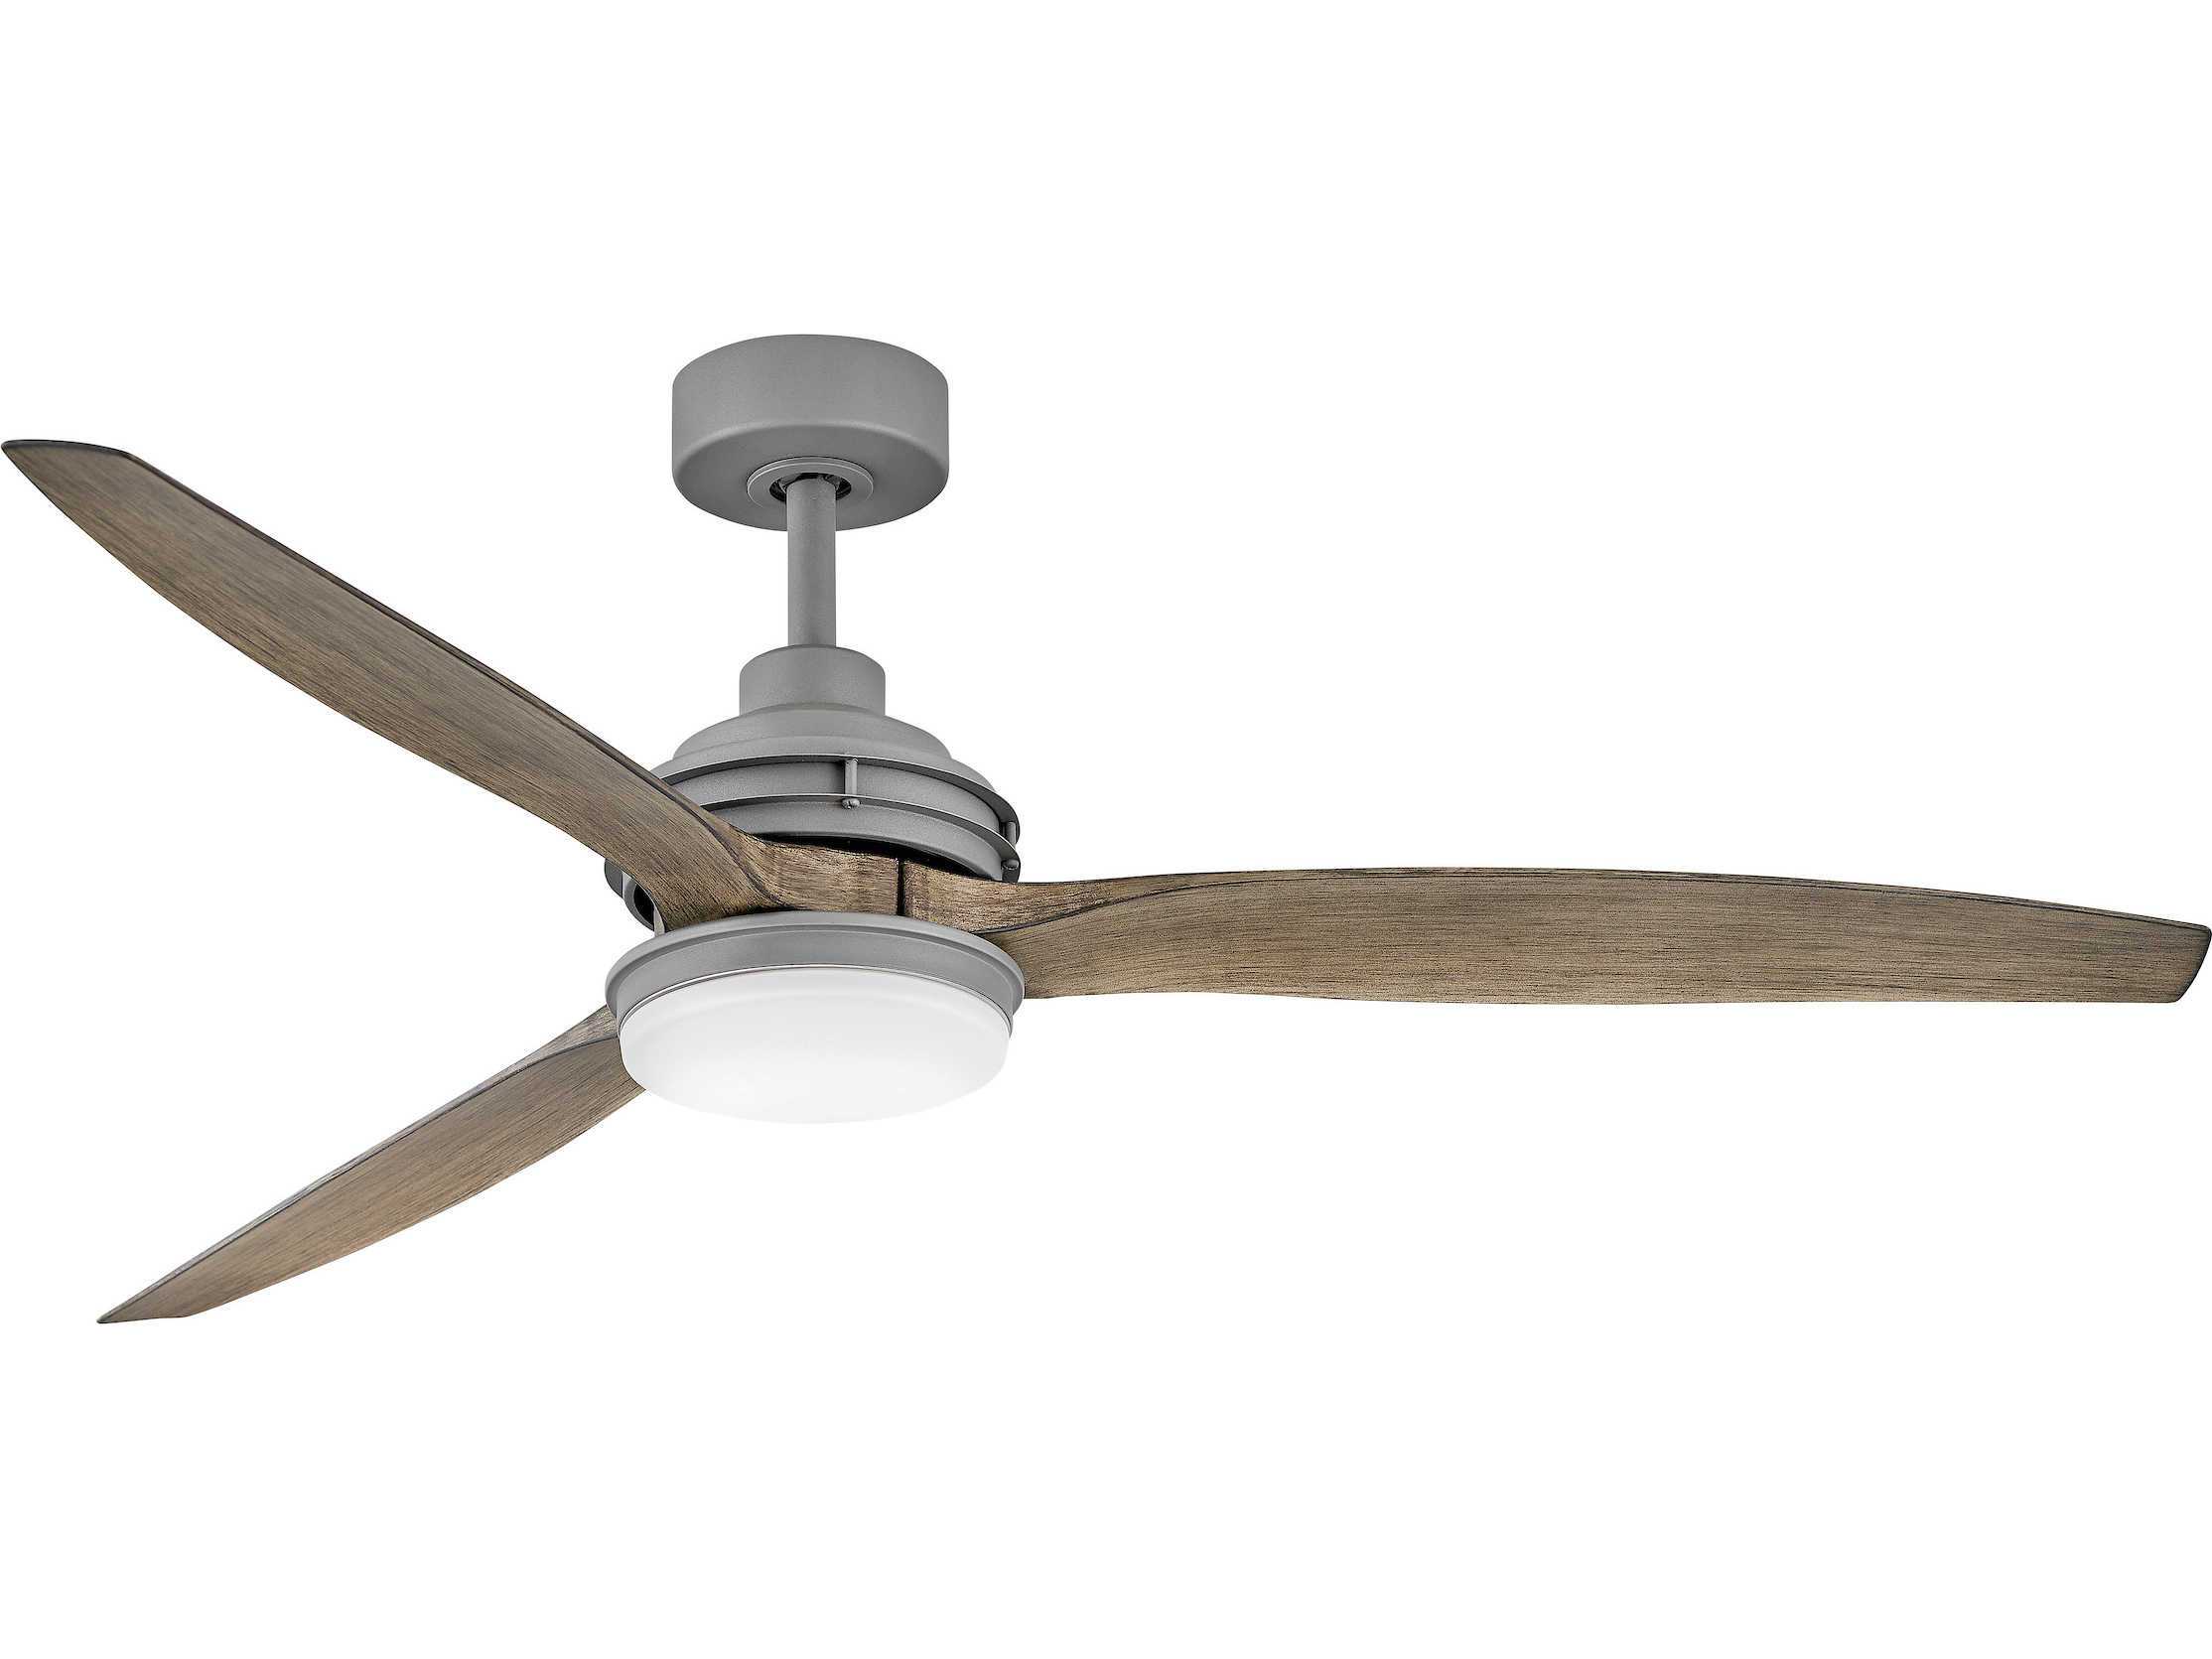 Hinkley Lighting Artiste Graphite 60 Wide Led Indoor Outdoor Ceiling Fan With Driftwood Blades Hy900160fgtlwd